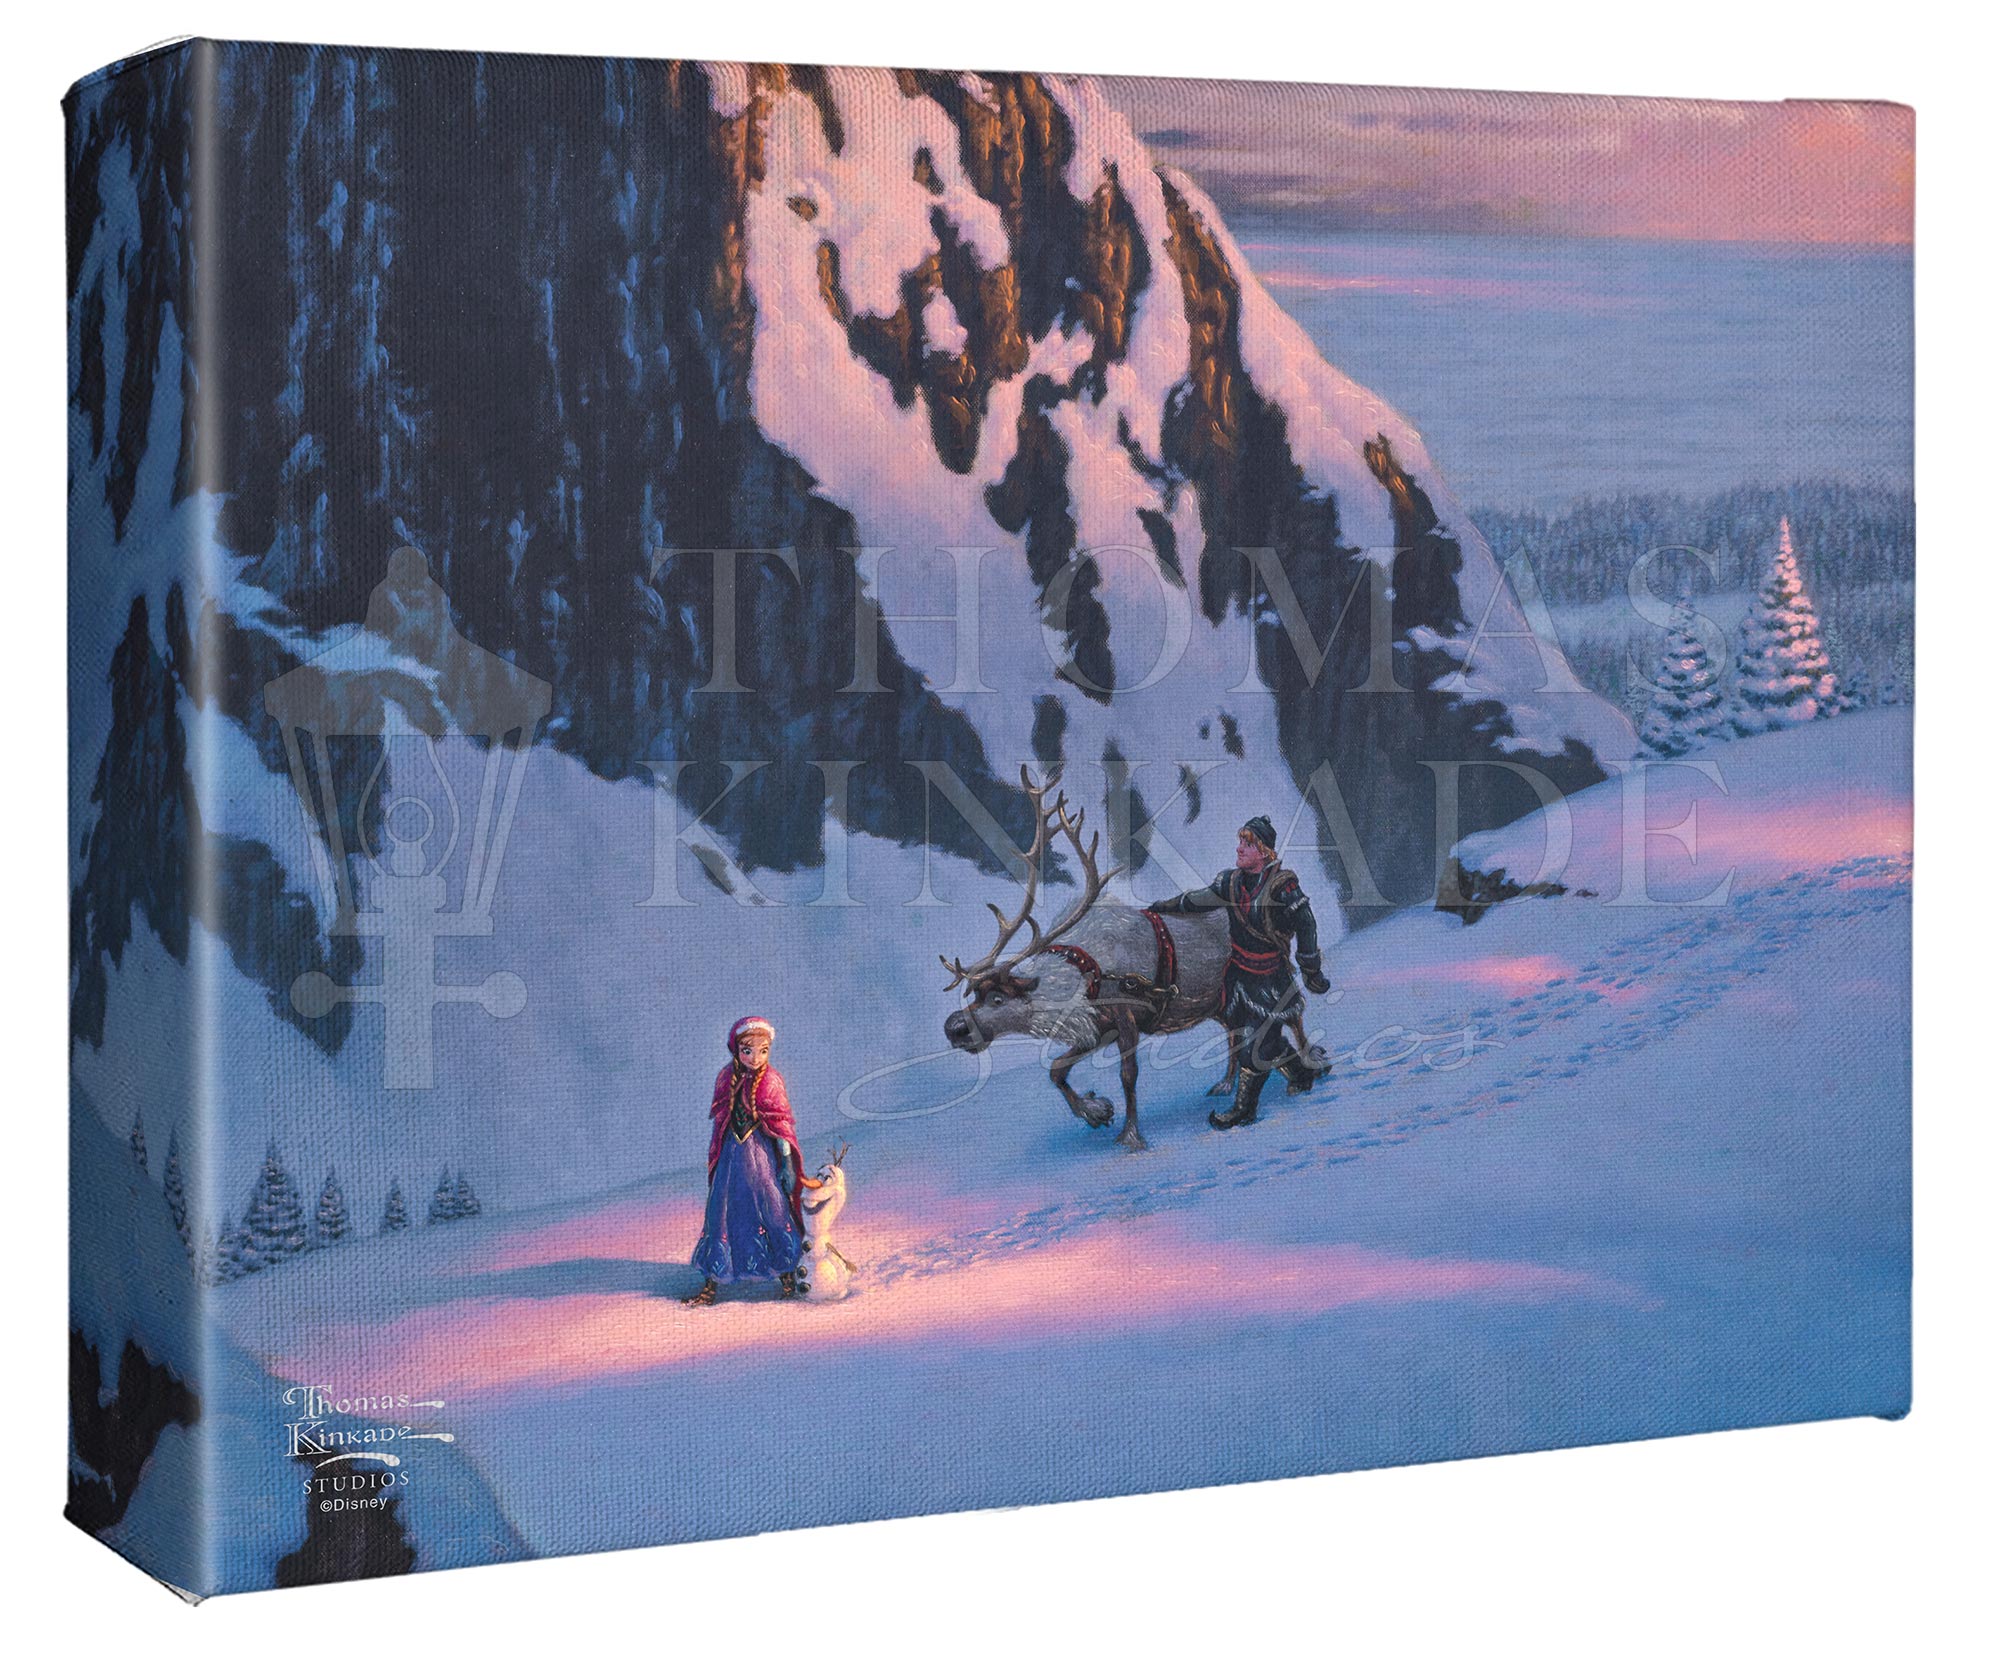 Disney Frozen - 8" x 10" Gallery Wrapped Canvas